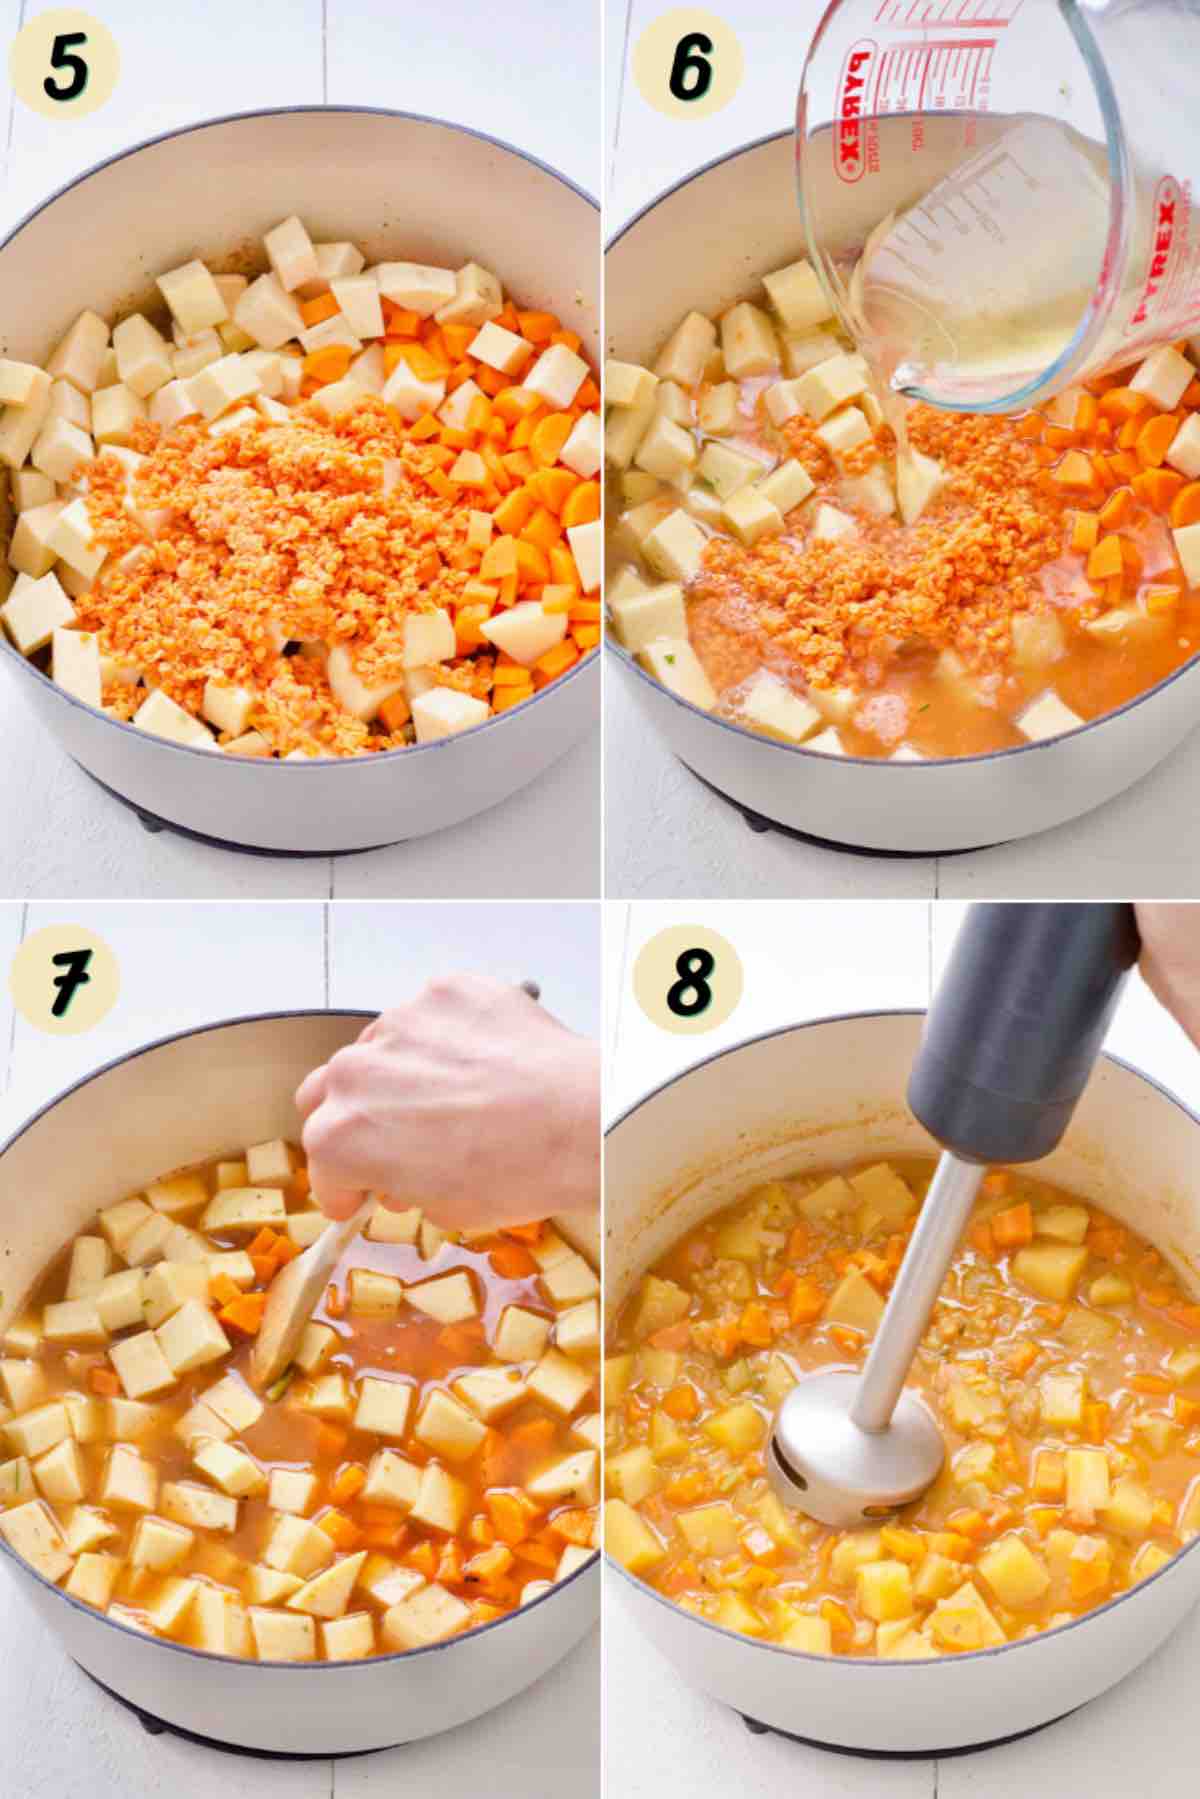 Process of making carrot and swede soup.